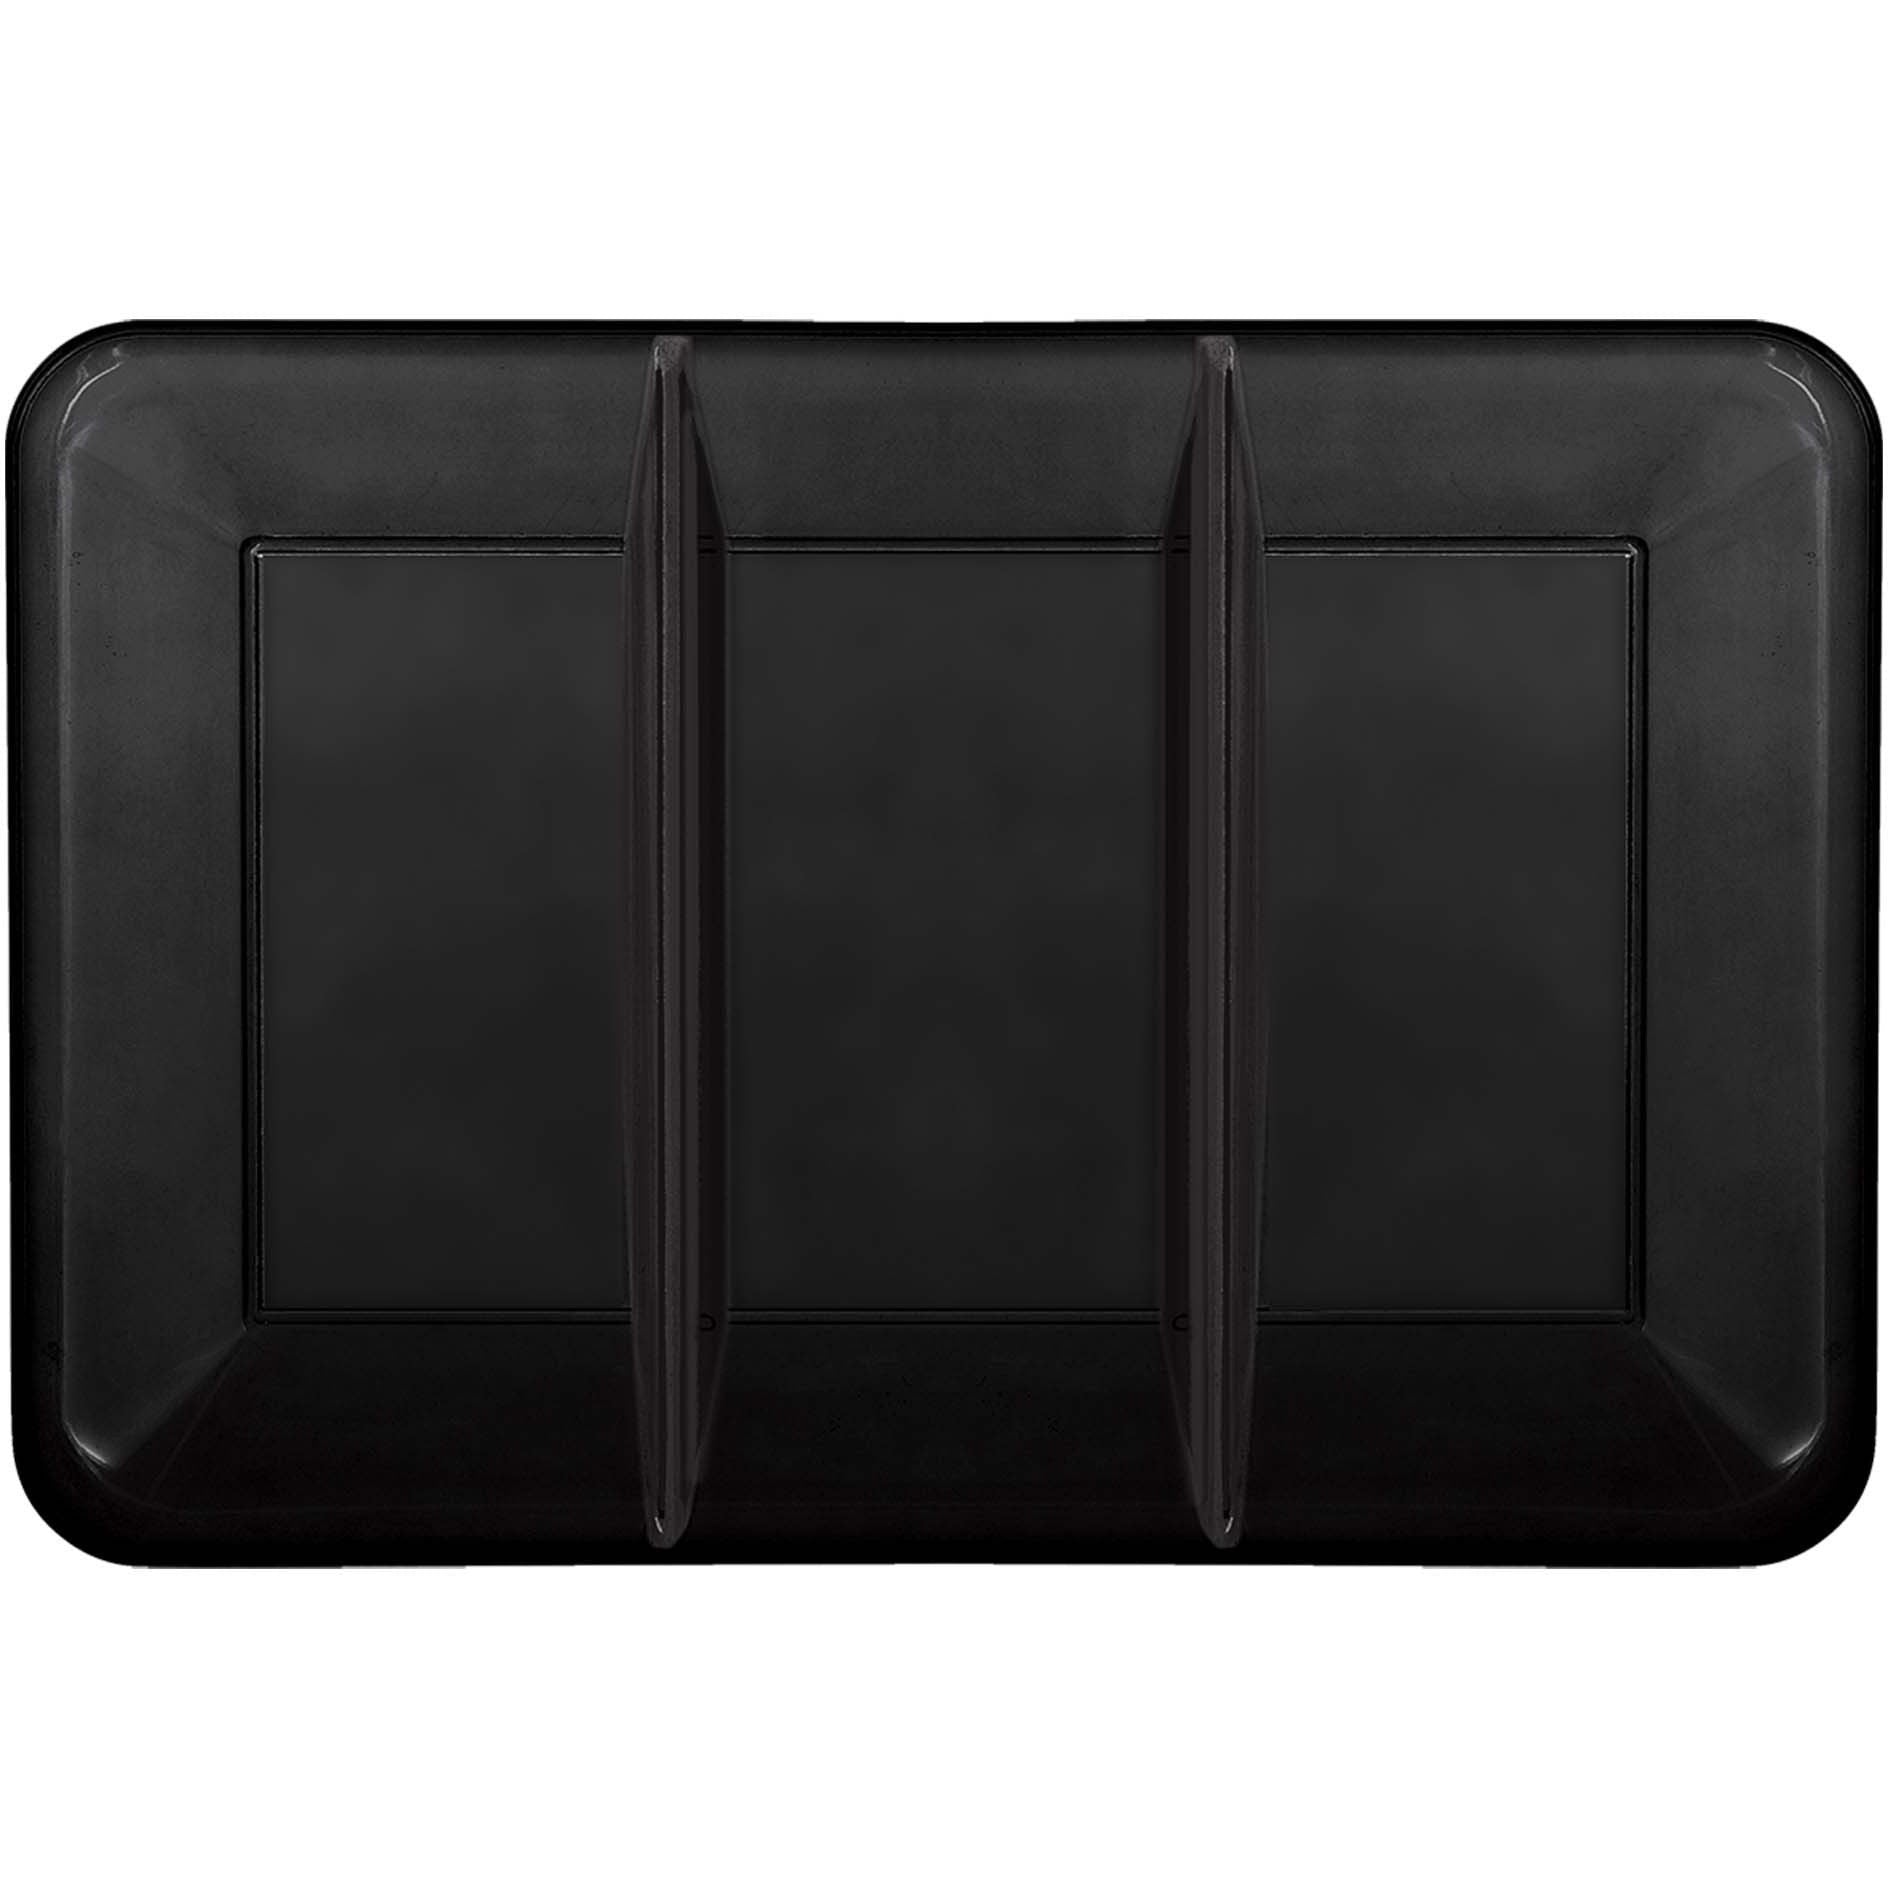 Amscan BASIC Black Compartment Tray